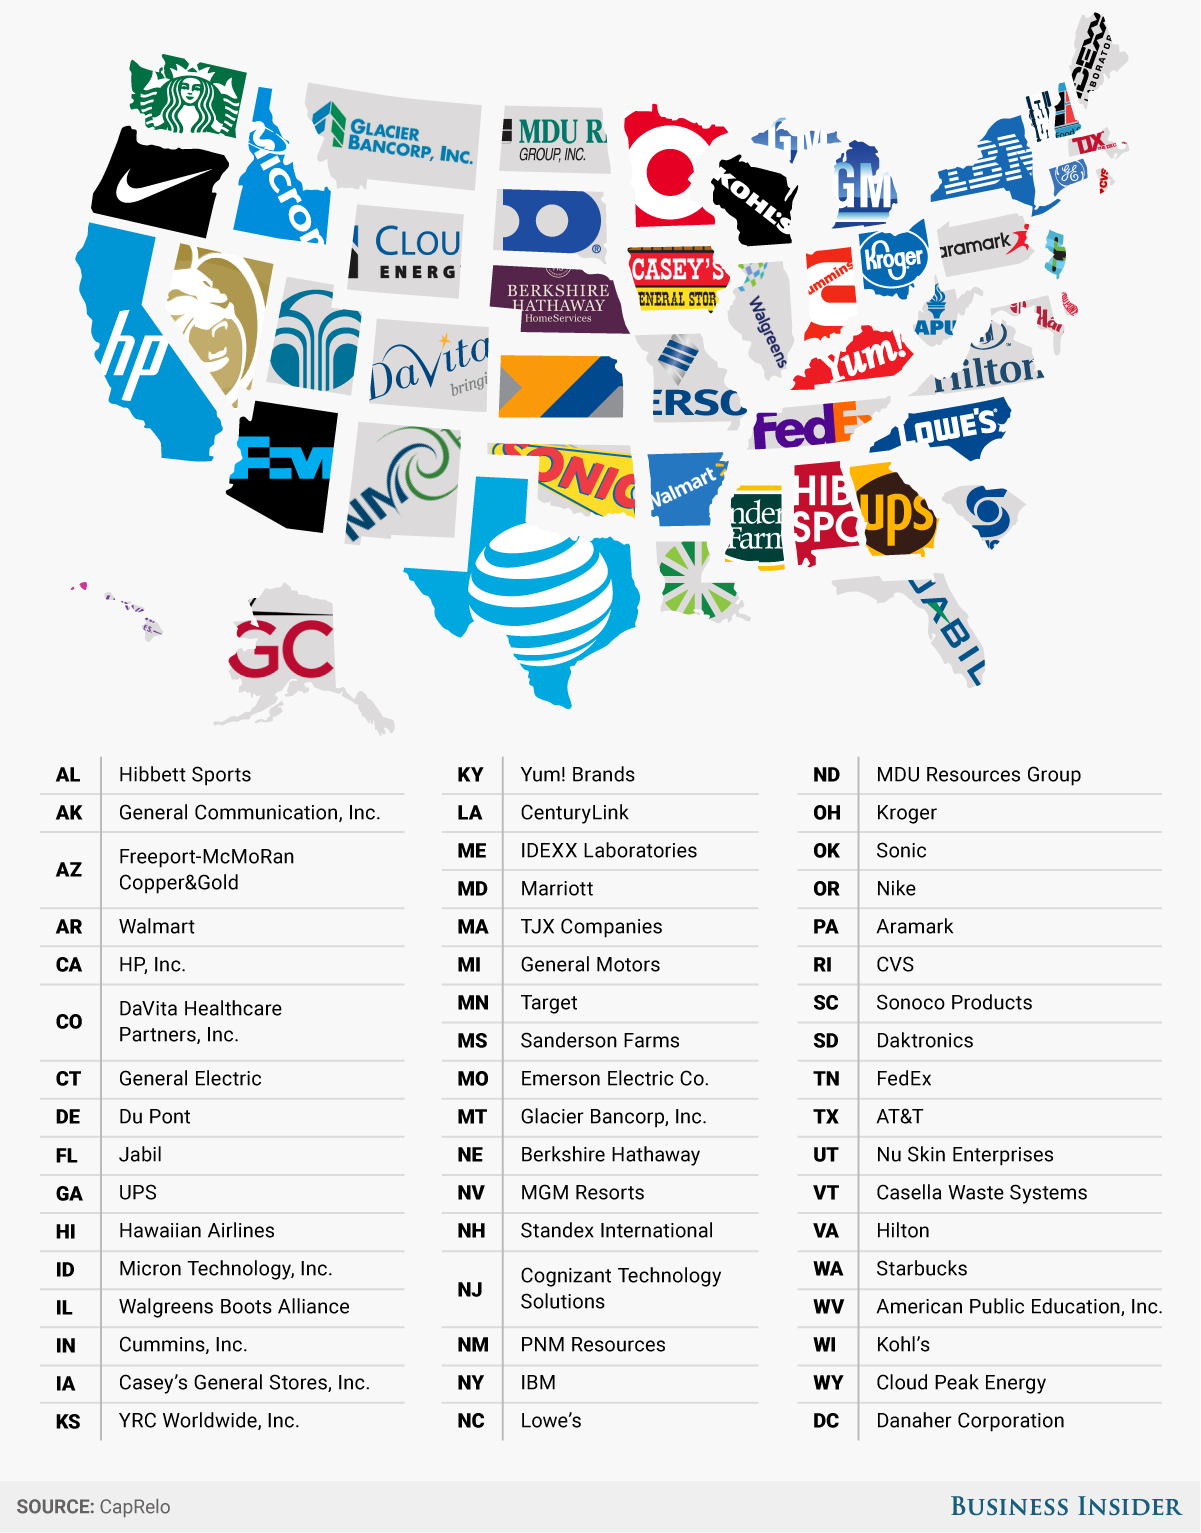 The Largest Company Headquartered in Each State, by Number of Employees